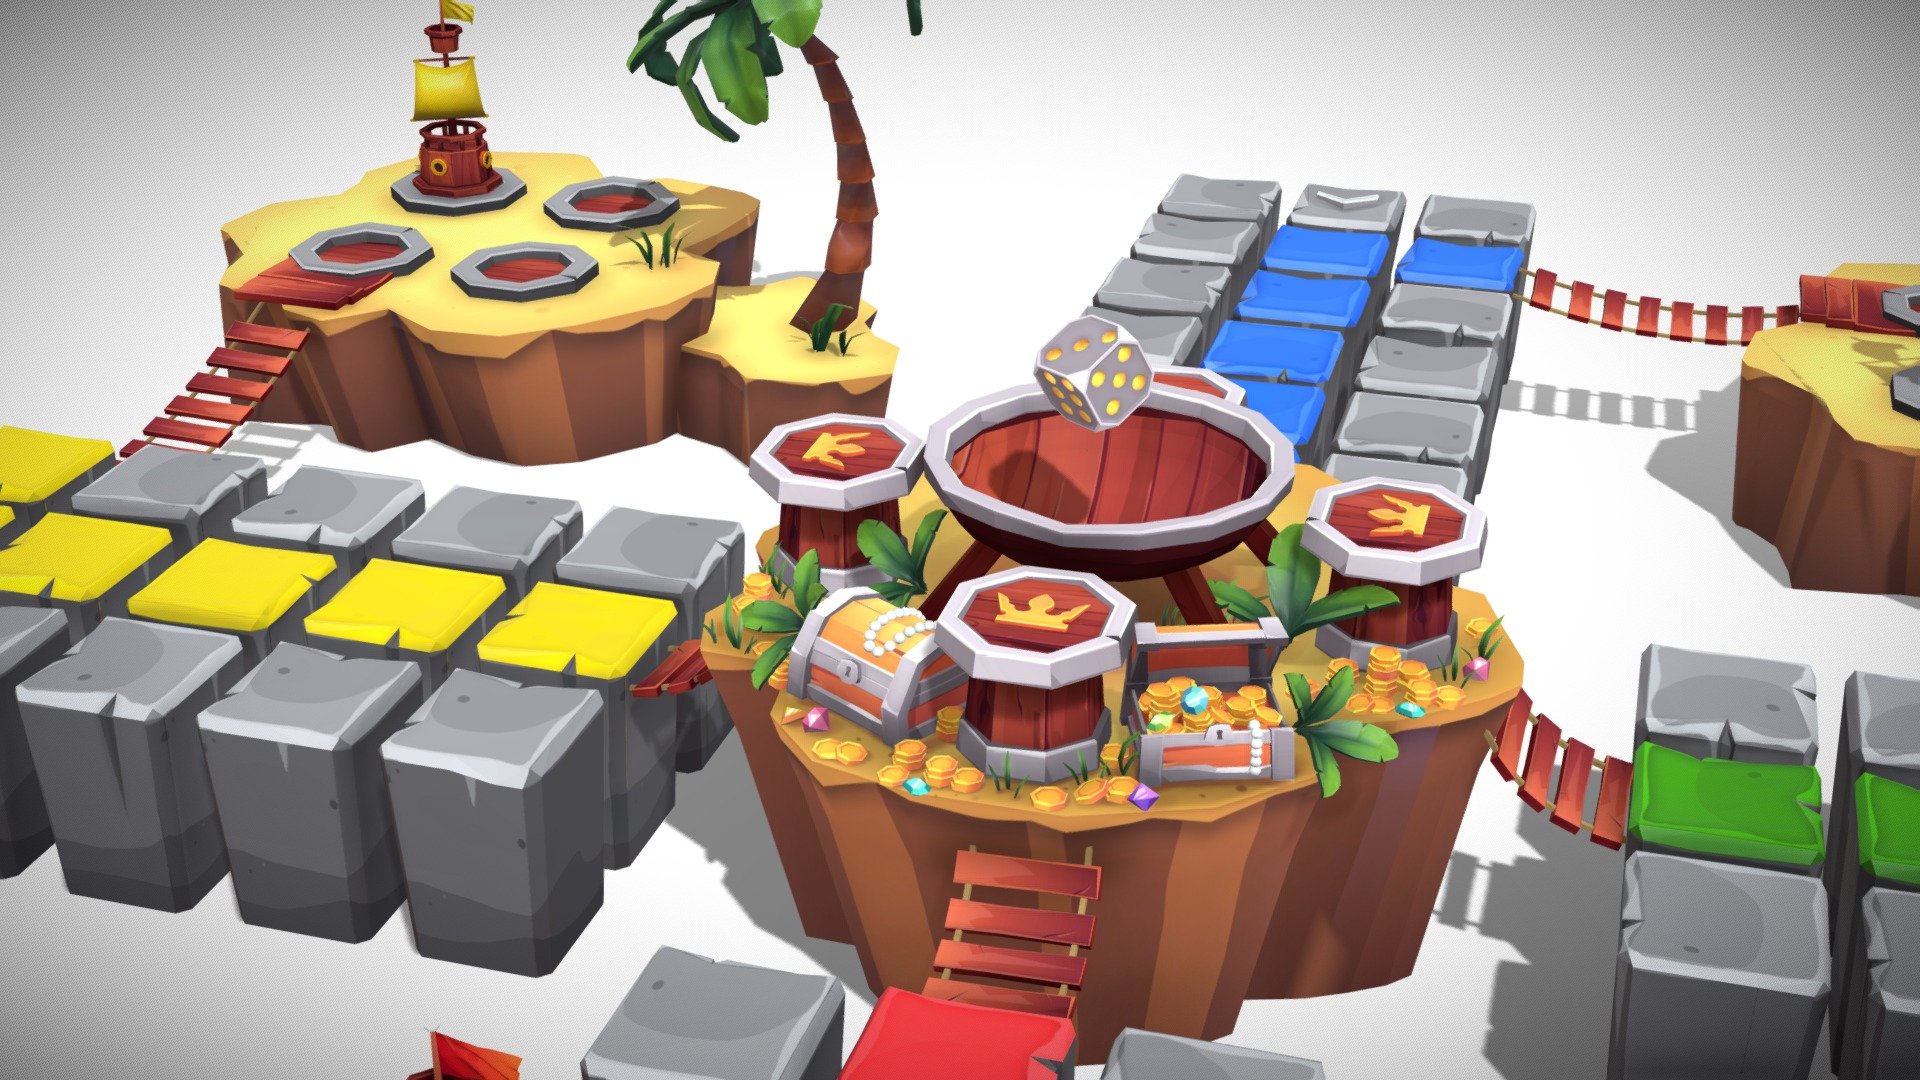 LUDO PIRATES ISLANDS GAME UNITY ASSETS
Done on blender
ready assets for your game, with animation
colorful - LUDO PIRATES ISLANDS GAME UNITY ASSETS ANIMATED - Buy Royalty Free 3D model by haykel-shaba (@haykel1993) 3d model